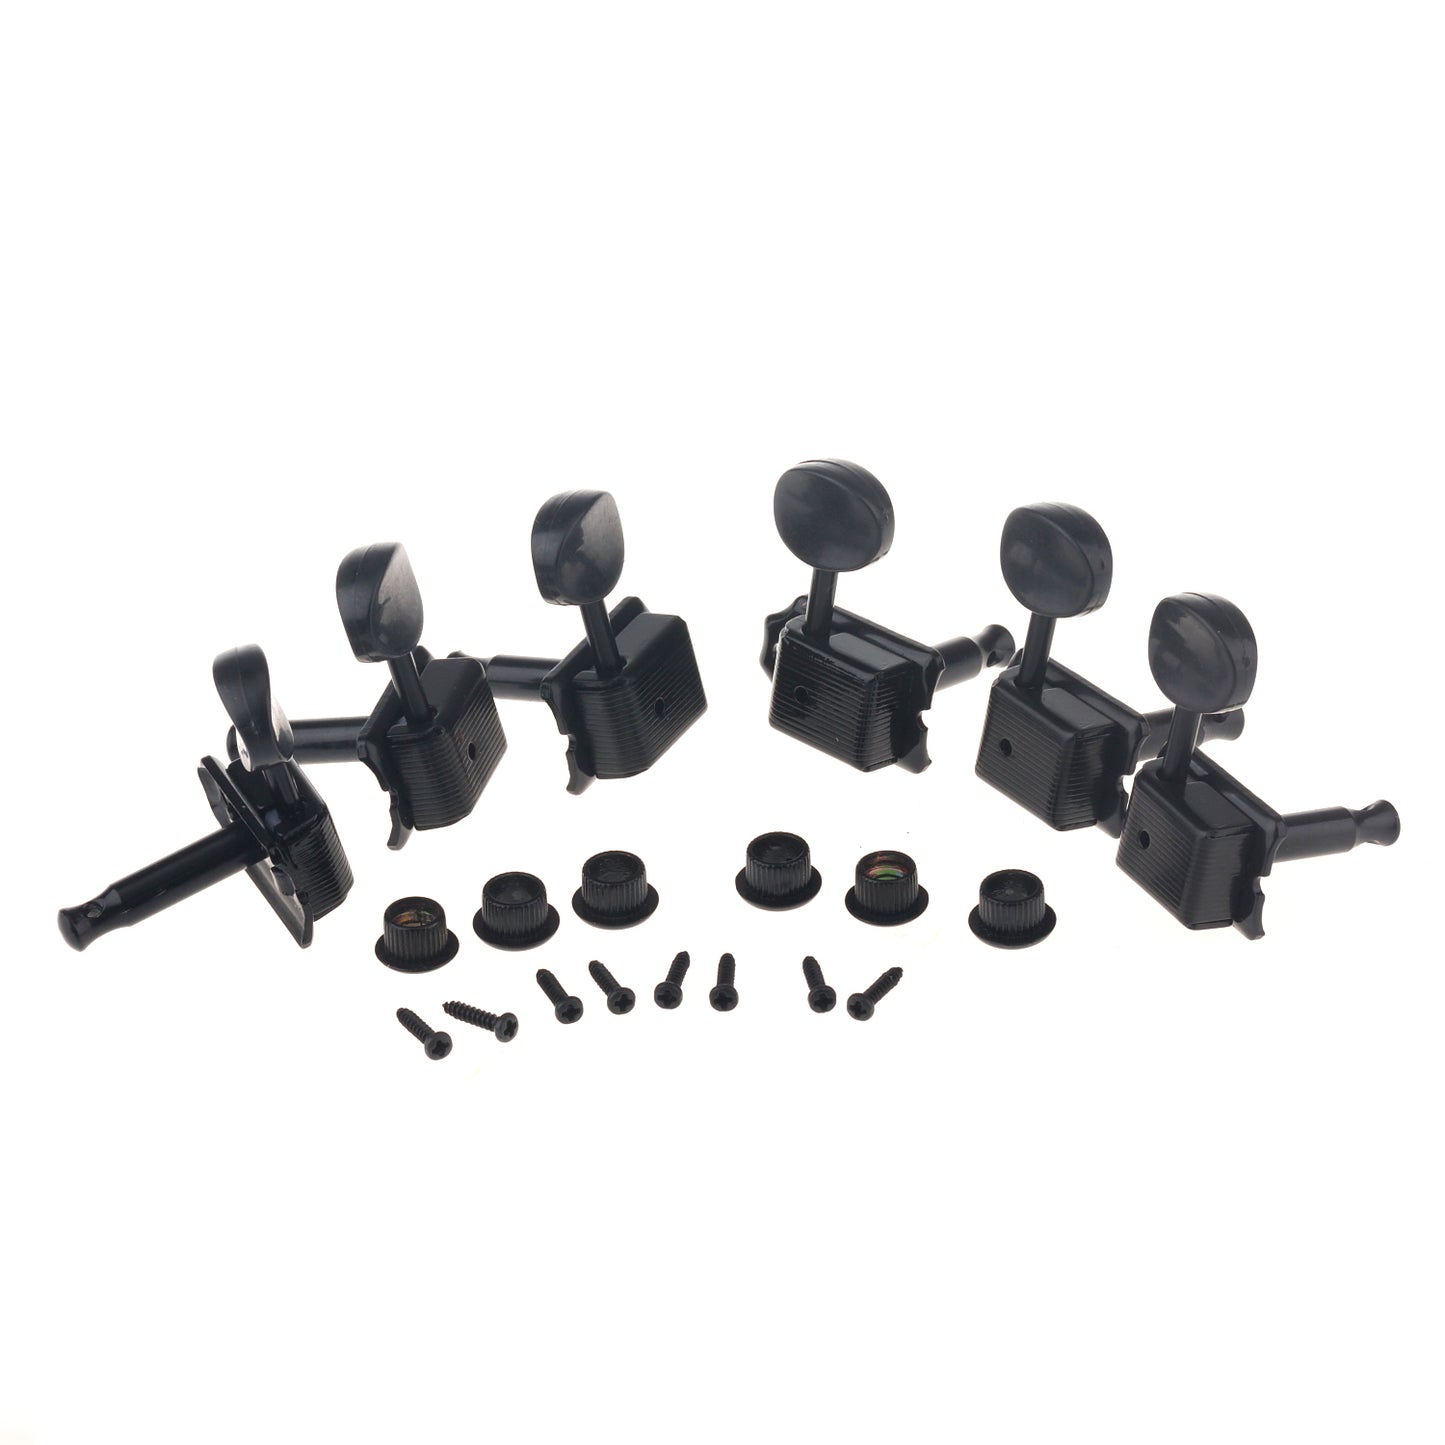 Musiclily Vintage Style 6 in Line Guitar Tuners Tuning Pegs Keys  Machine Heads for  Strat or Squier Style, Black